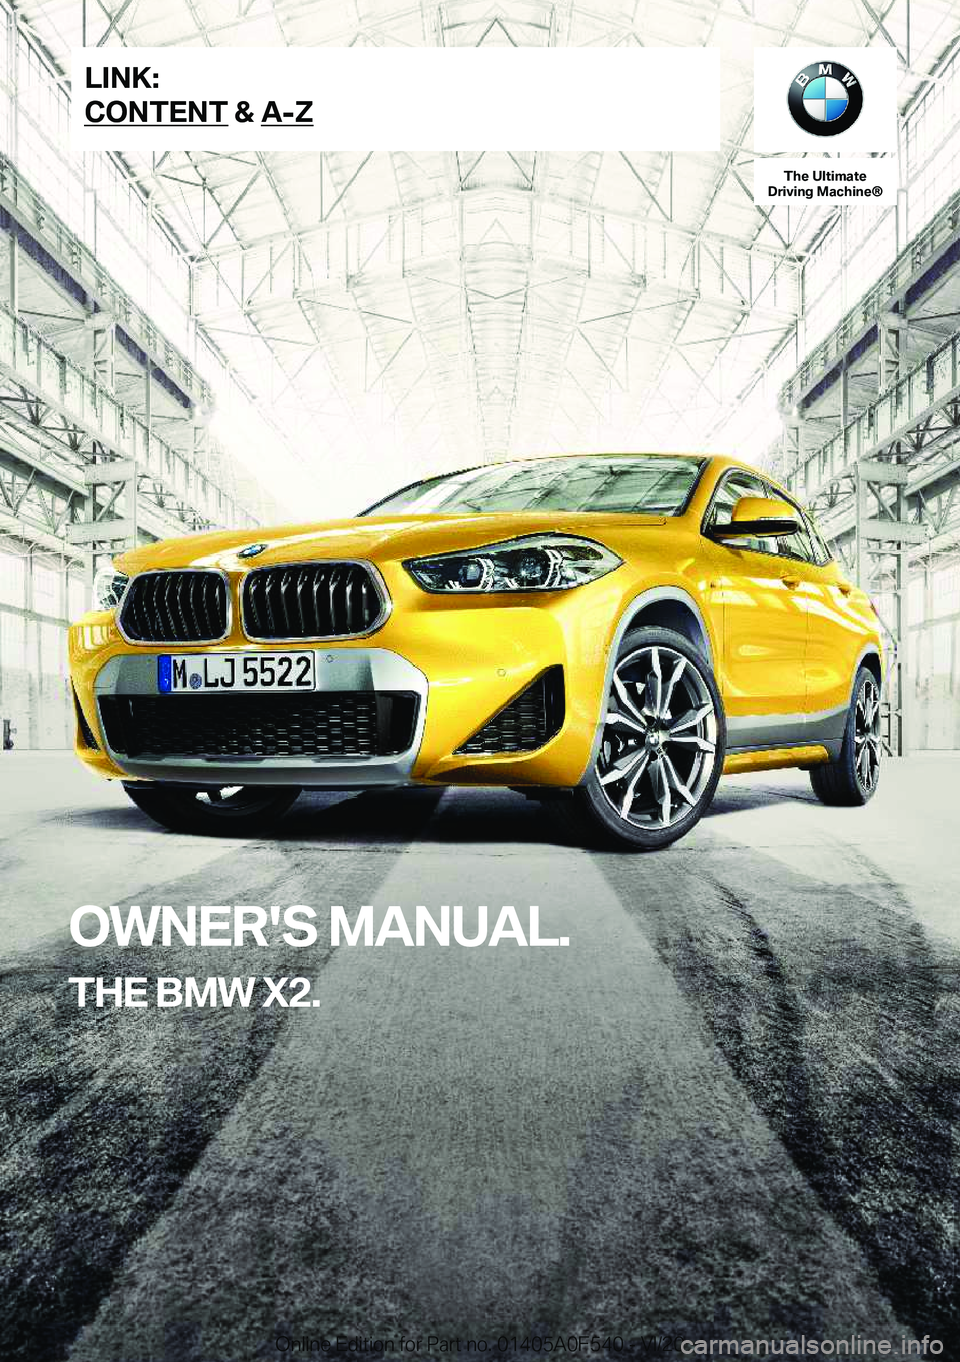 BMW X2 2021  Owners Manual �T�h�e��U�l�t�i�m�a�t�e
�D�r�i�v�i�n�g��M�a�c�h�i�n�e�n
�O�W�N�E�R�'�S��M�A�N�U�A�L�.
�T�H�E��B�M�W��X�2�.�L�I�N�K�:
�C�O�N�T�E�N�T��&��A�-�Z�O�n�l�i�n�e��E�d�i�t�i�o�n��f�o�r��P�a�r�t�